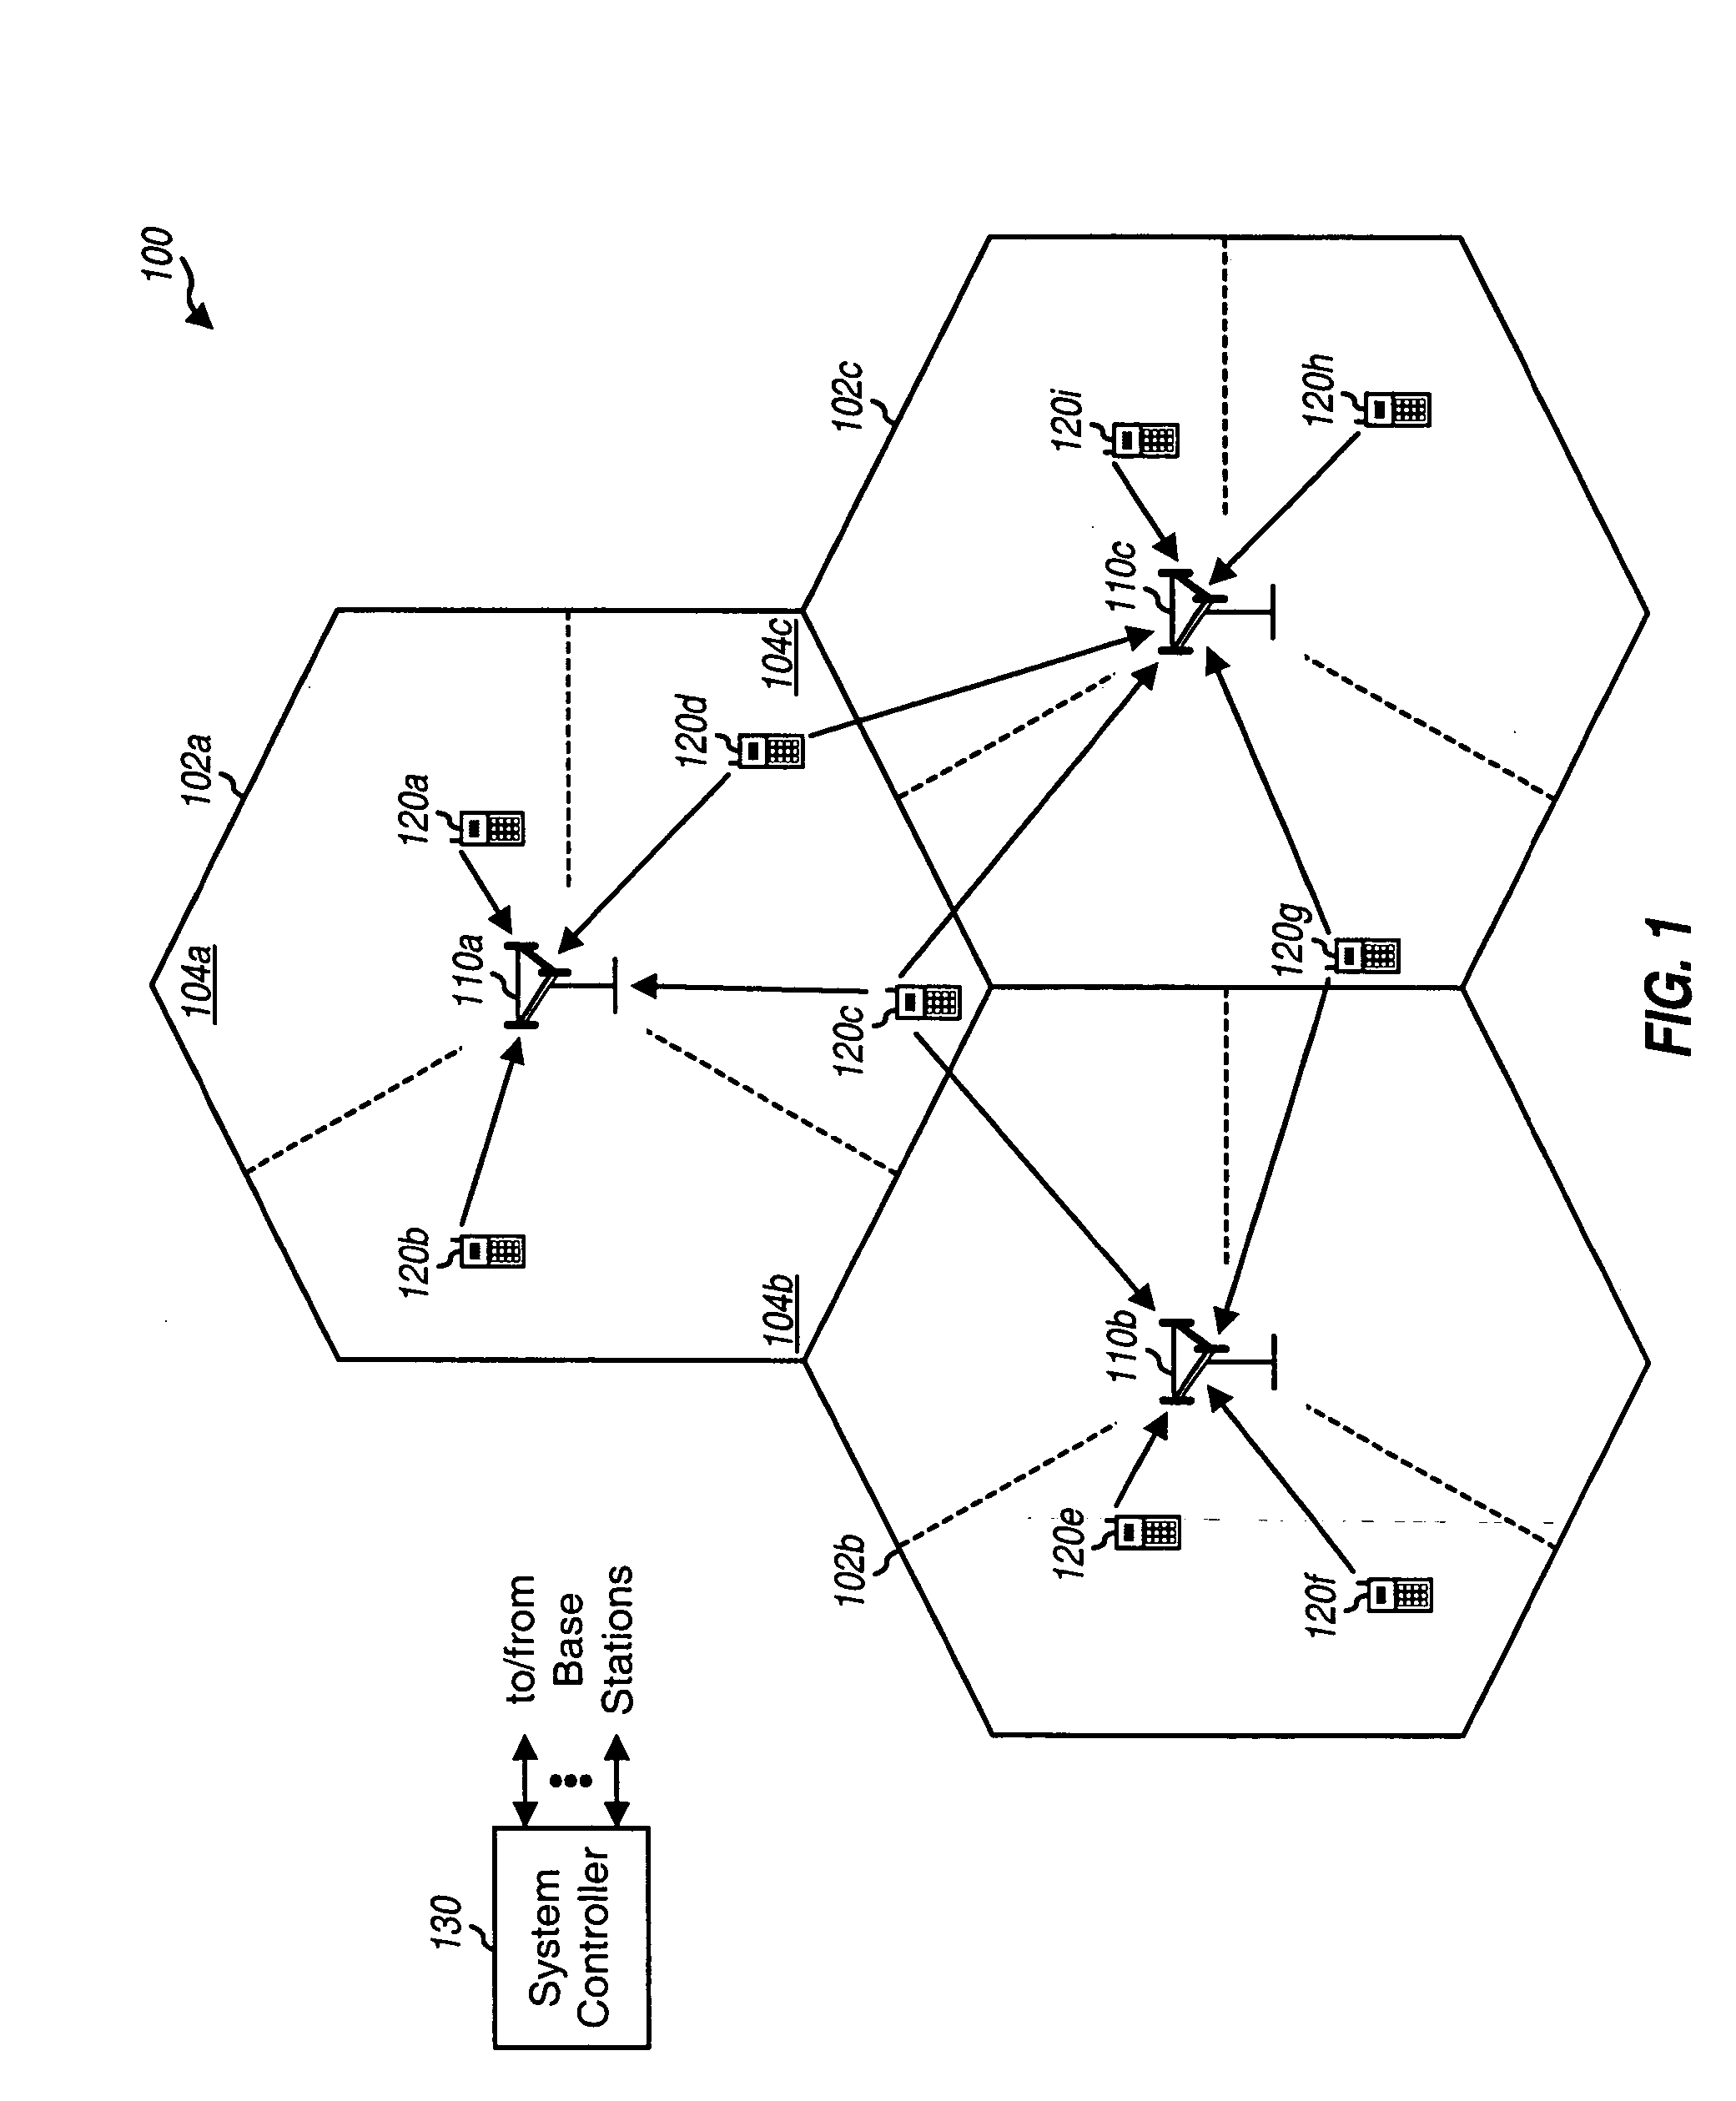 Power control for a wireless communication system utilizing orthogonal multiplexing